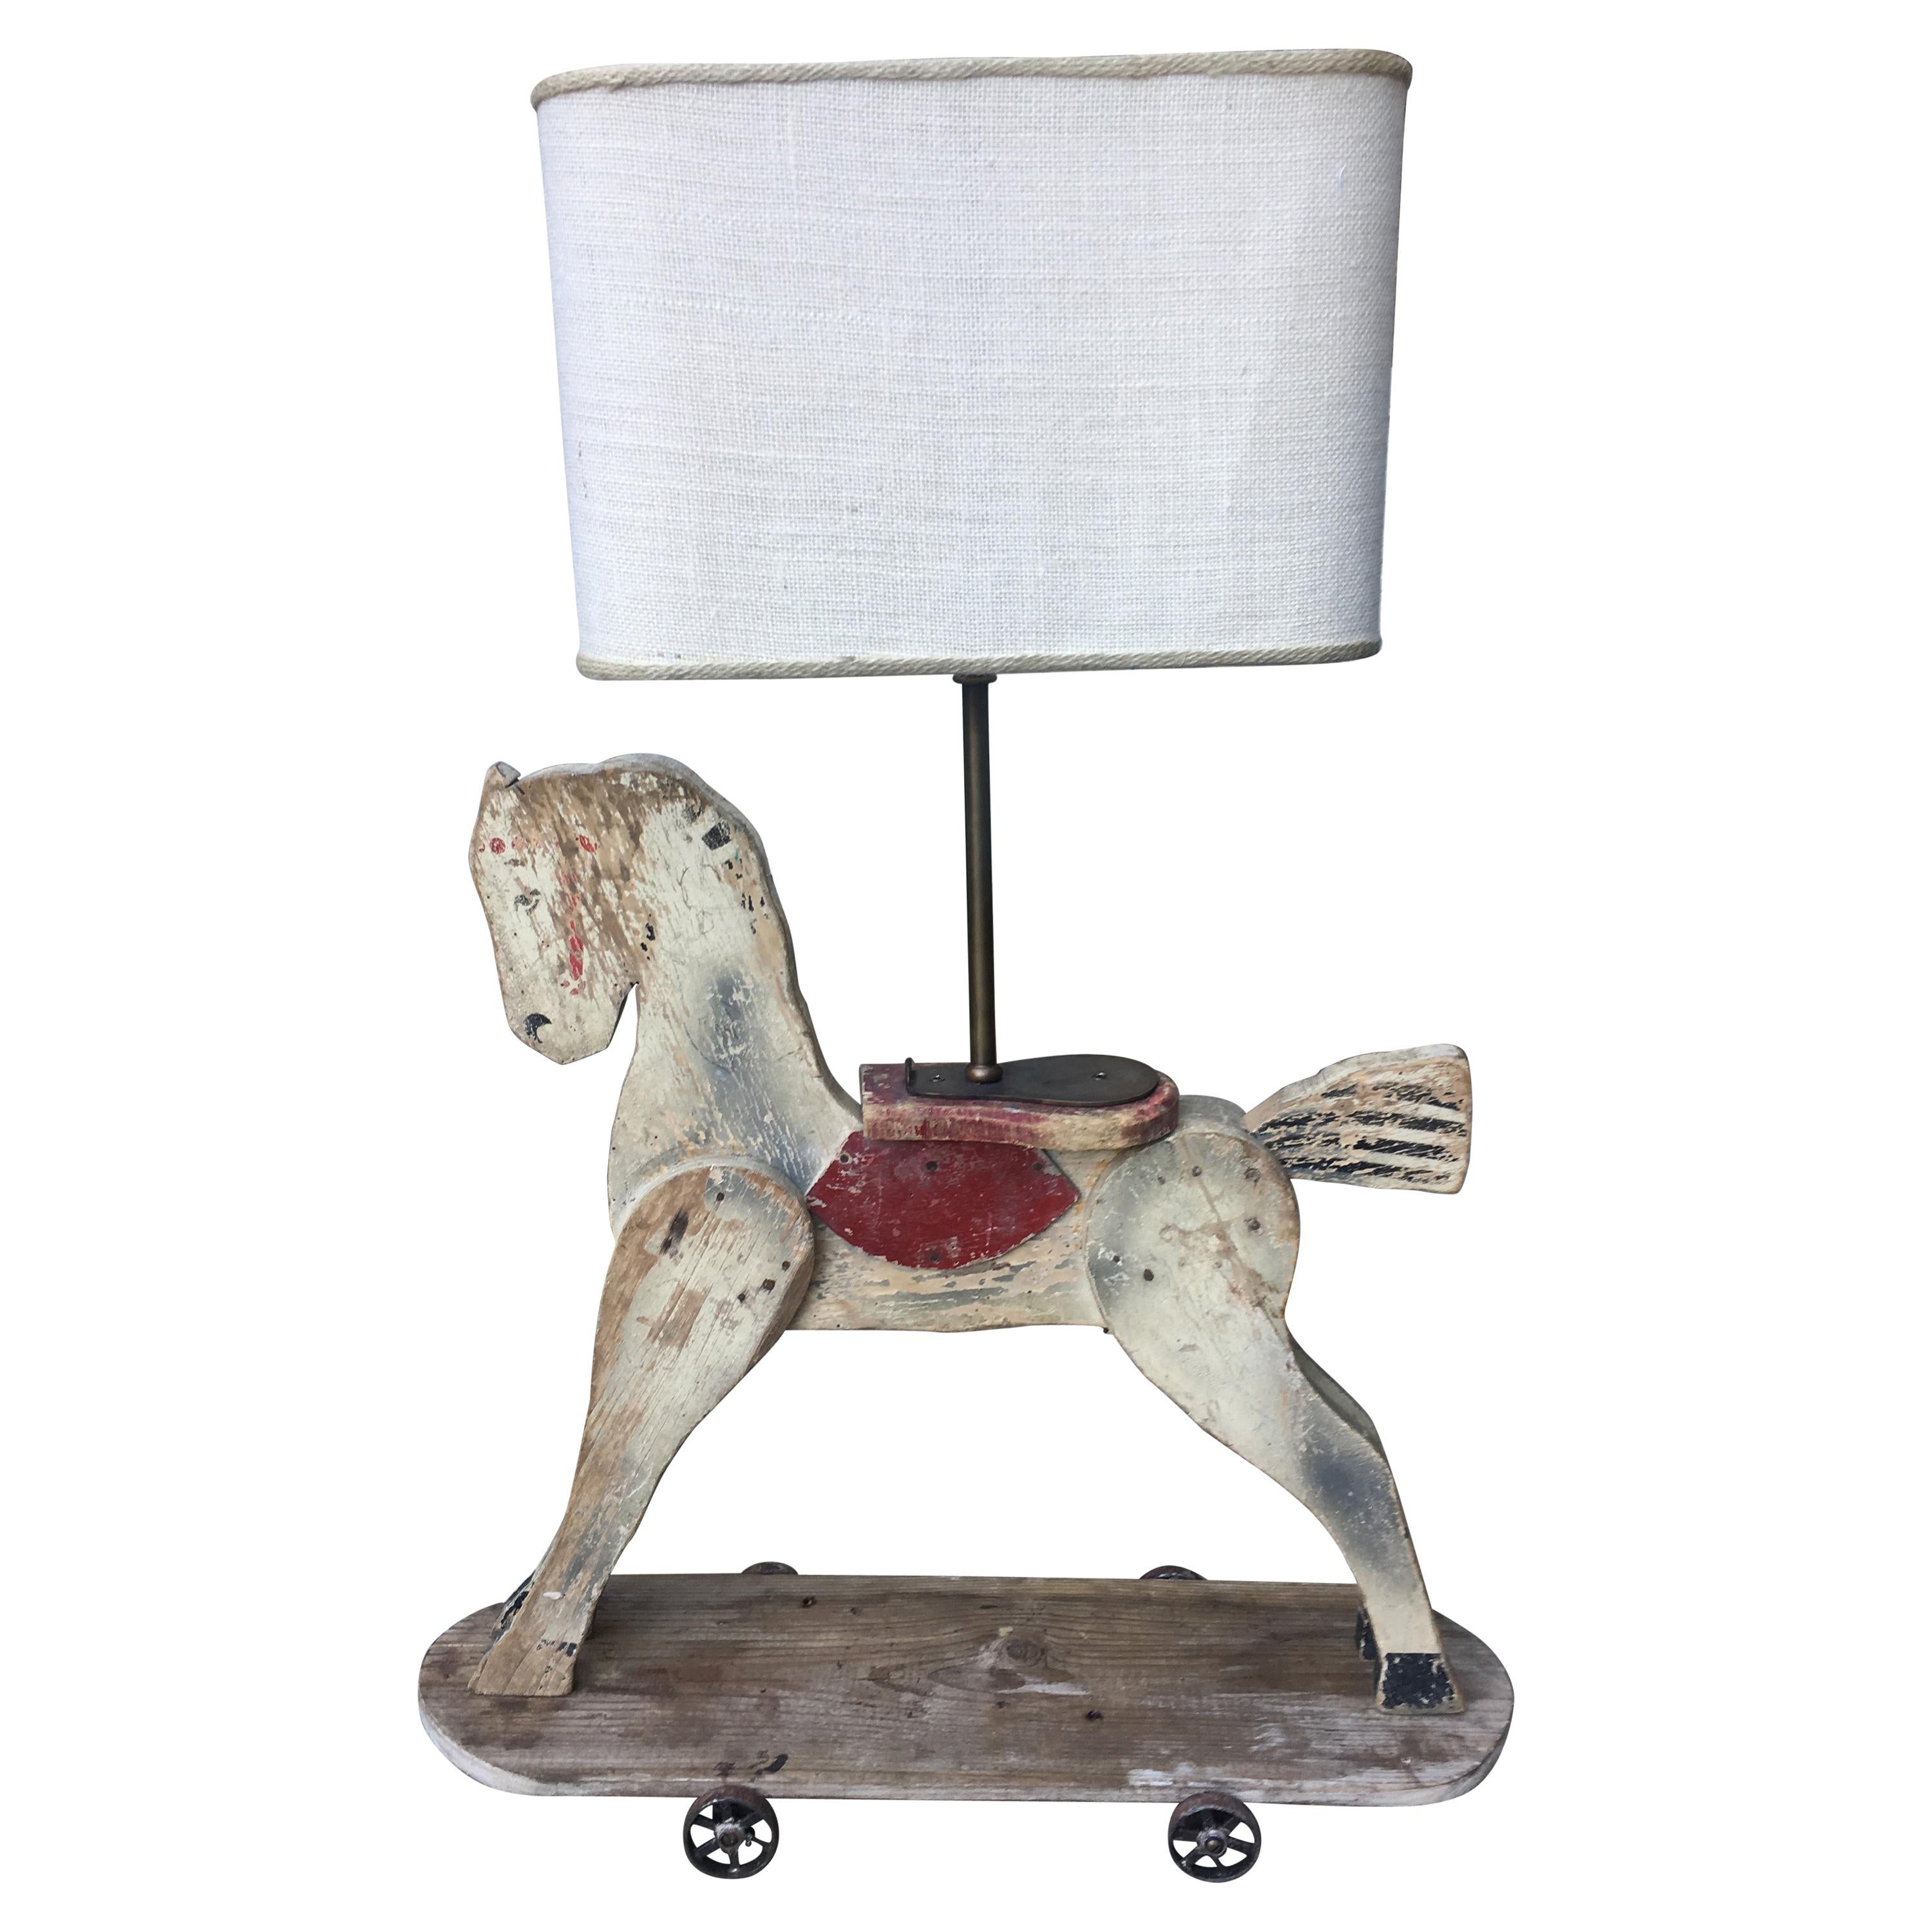 19th Century Italian Wooden Horse Children's Toy Converted into Table Lamp